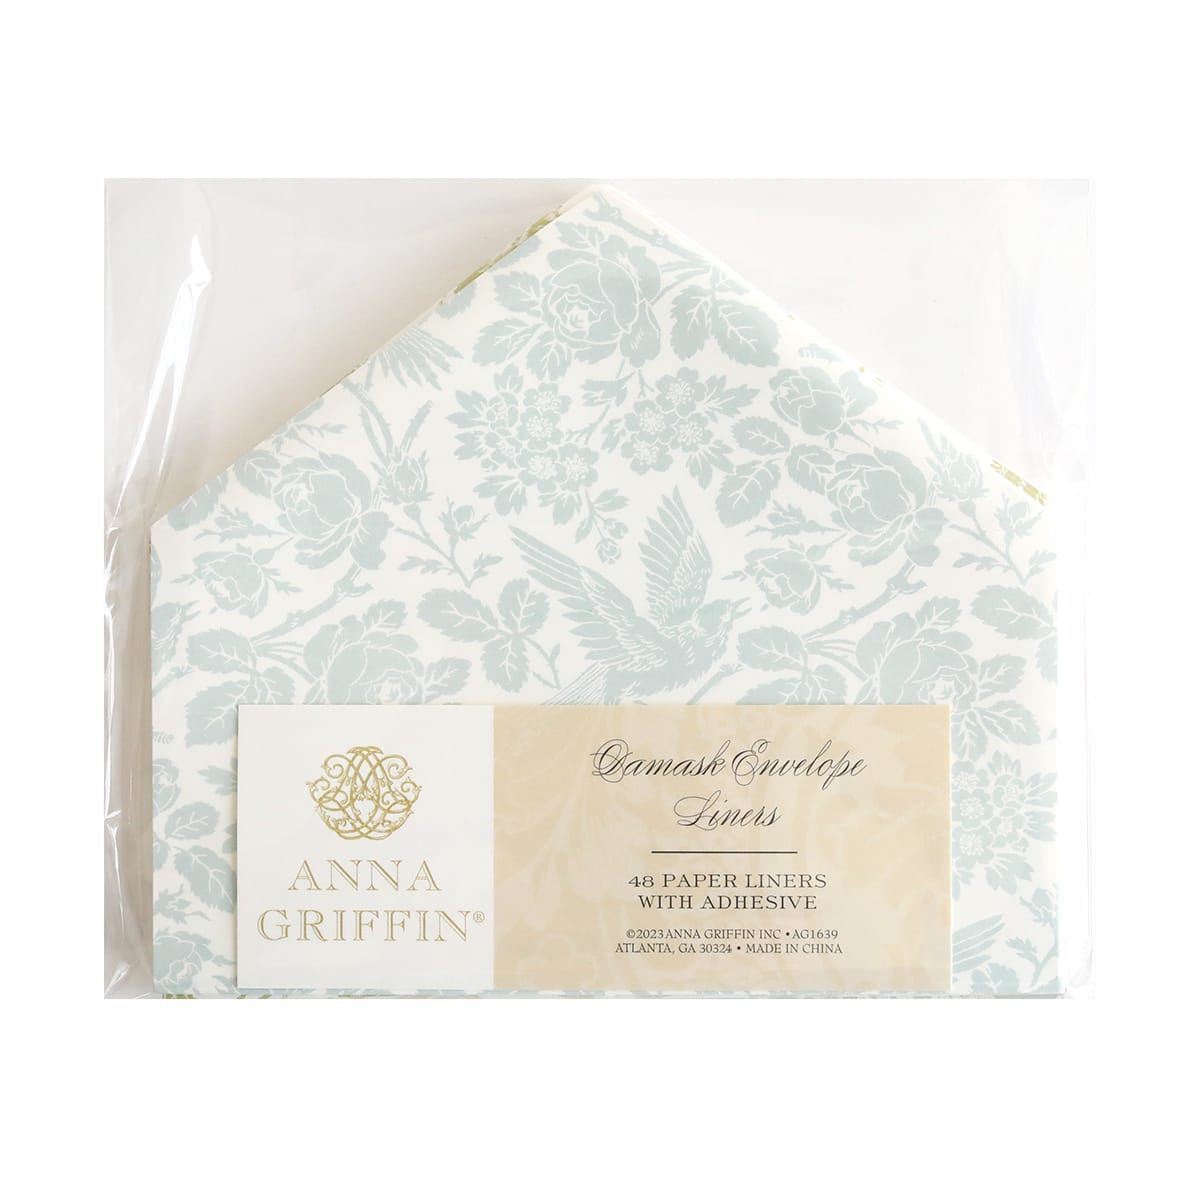 Anna griffin's Damask Envelope Liners